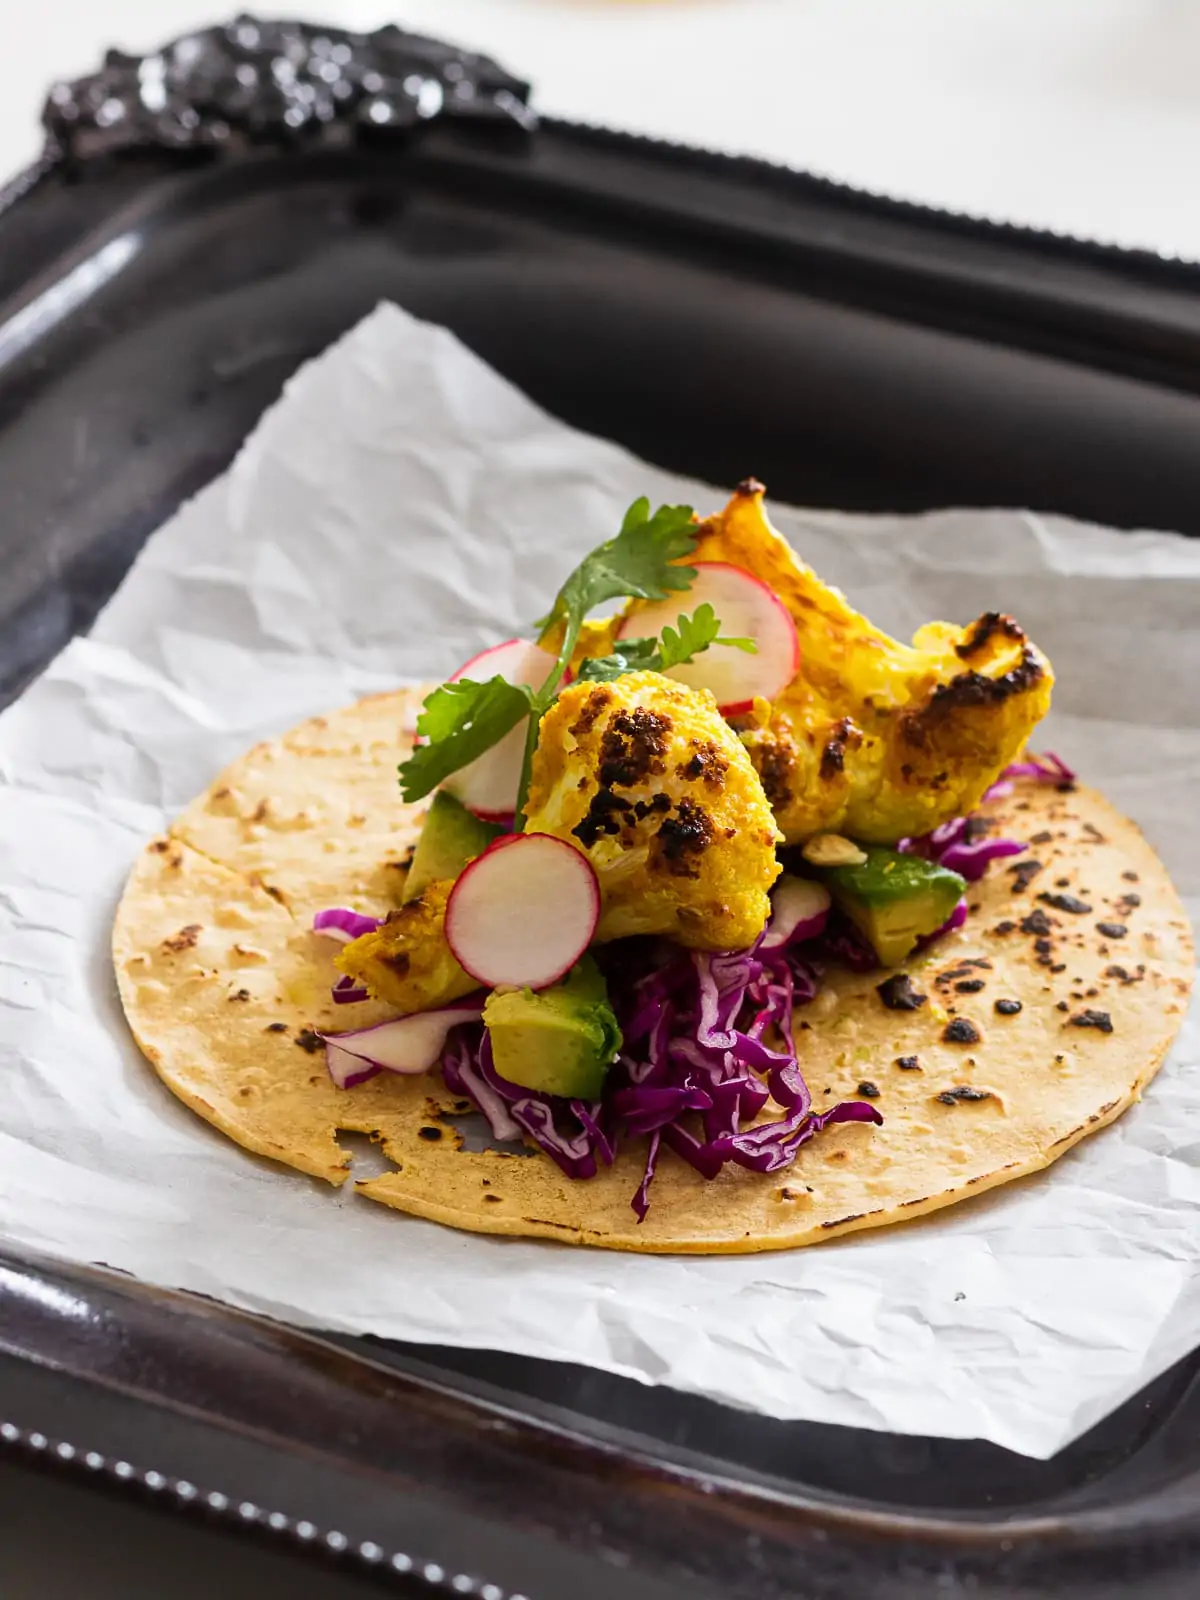 tandoori cauliflower florets on a corn tortilla with red cabbage and herbs